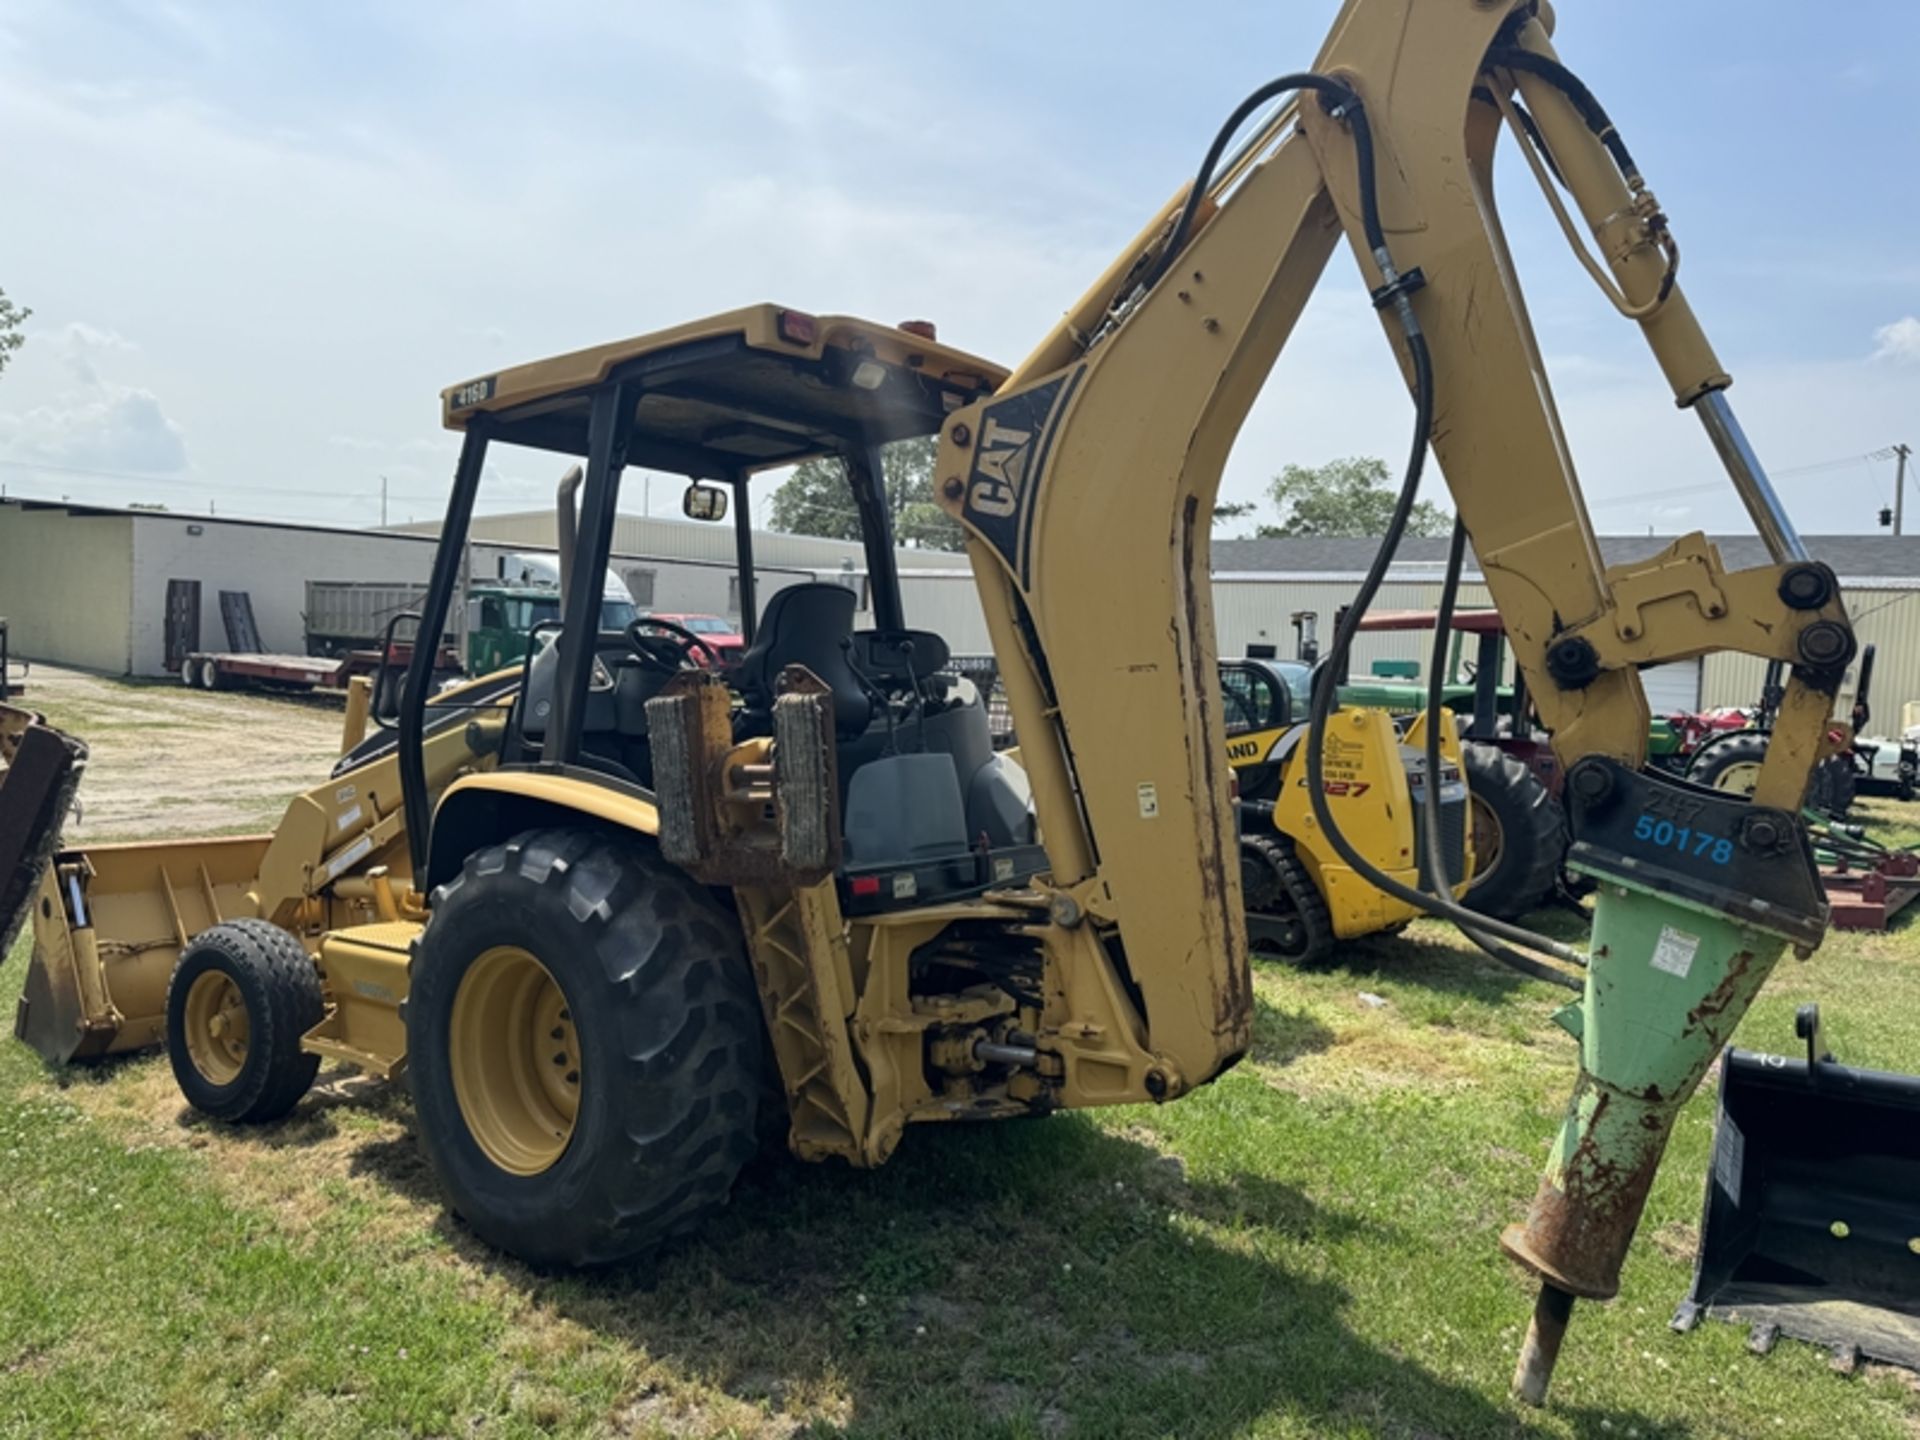 CAT 416D backhoe, 2wd with TRAMAC SC36 jackhammer and 30" rear bucket – 2388 hours showing - - Image 4 of 5